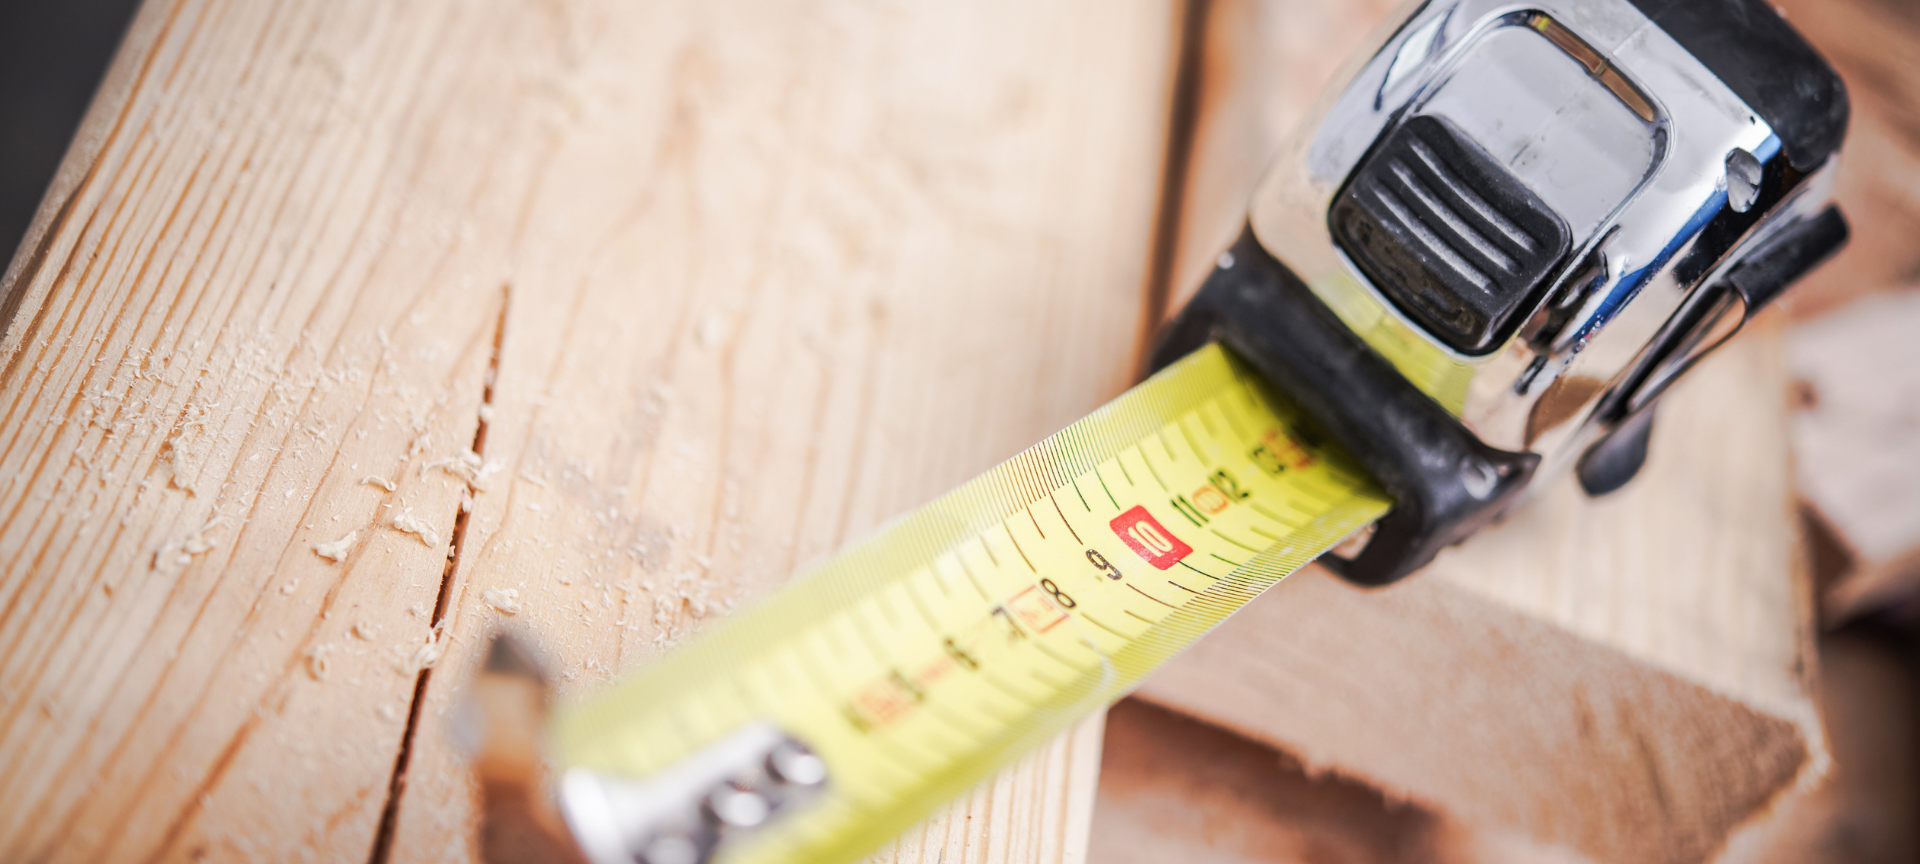 measuring tape standing on a piece of wood